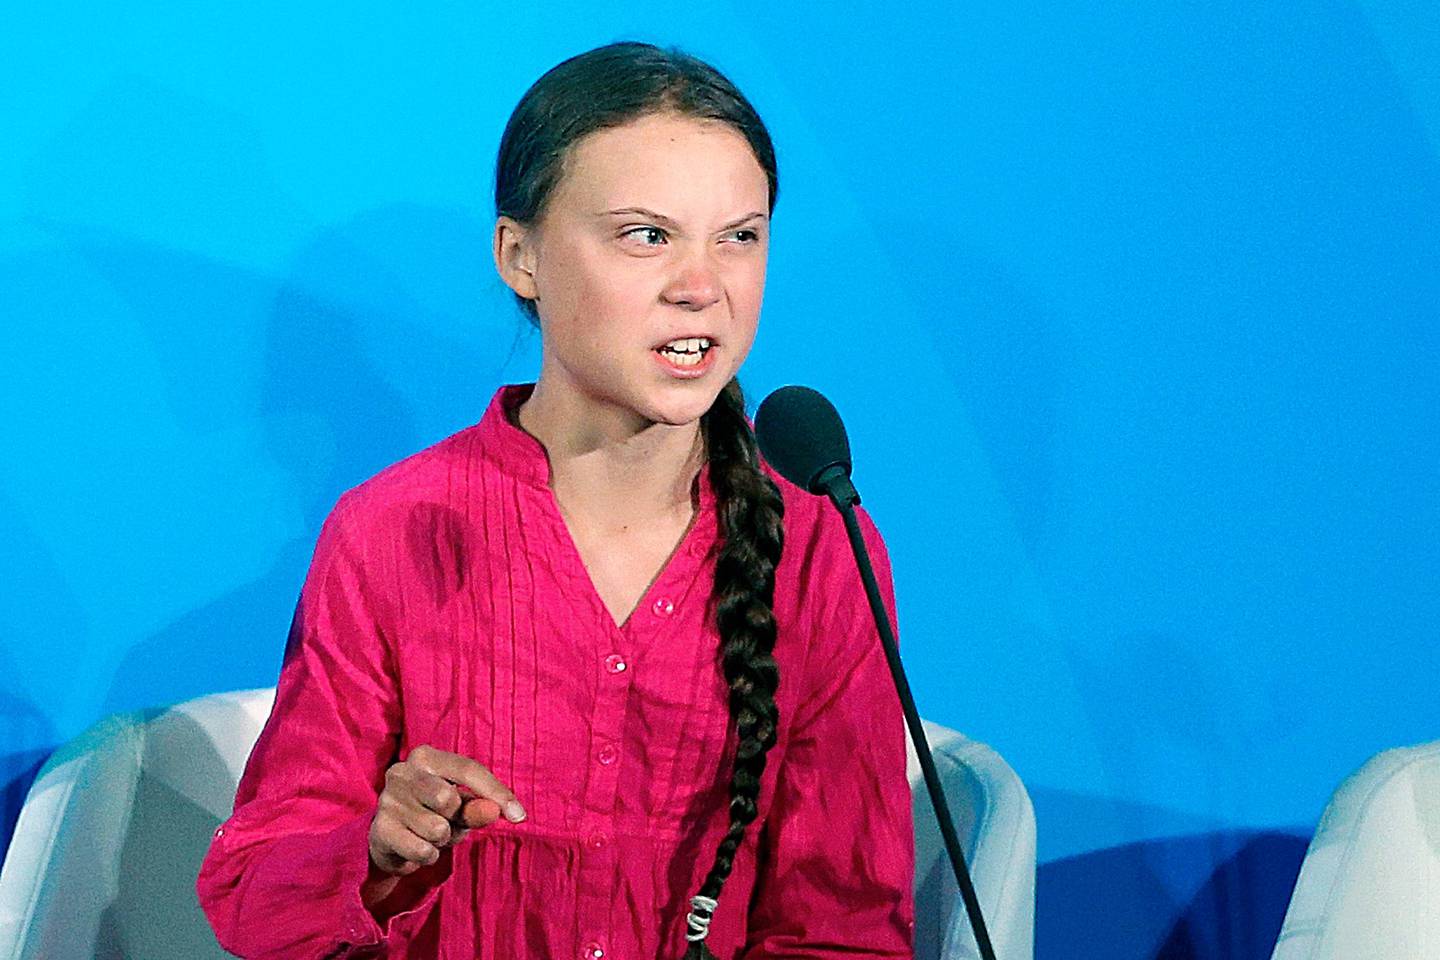 FILE - In this Sept. 23, 2019, file photo, environmental activist Greta Thunberg, of Sweden, addresses the Climate Action Summit at the United Nations General Assembly at U.N. headquarters. A statement she made during the summit is listed on a Yale Law School librarian's list of the most notable quotes of 2019. (AP Photo/Jason DeCrow, File)